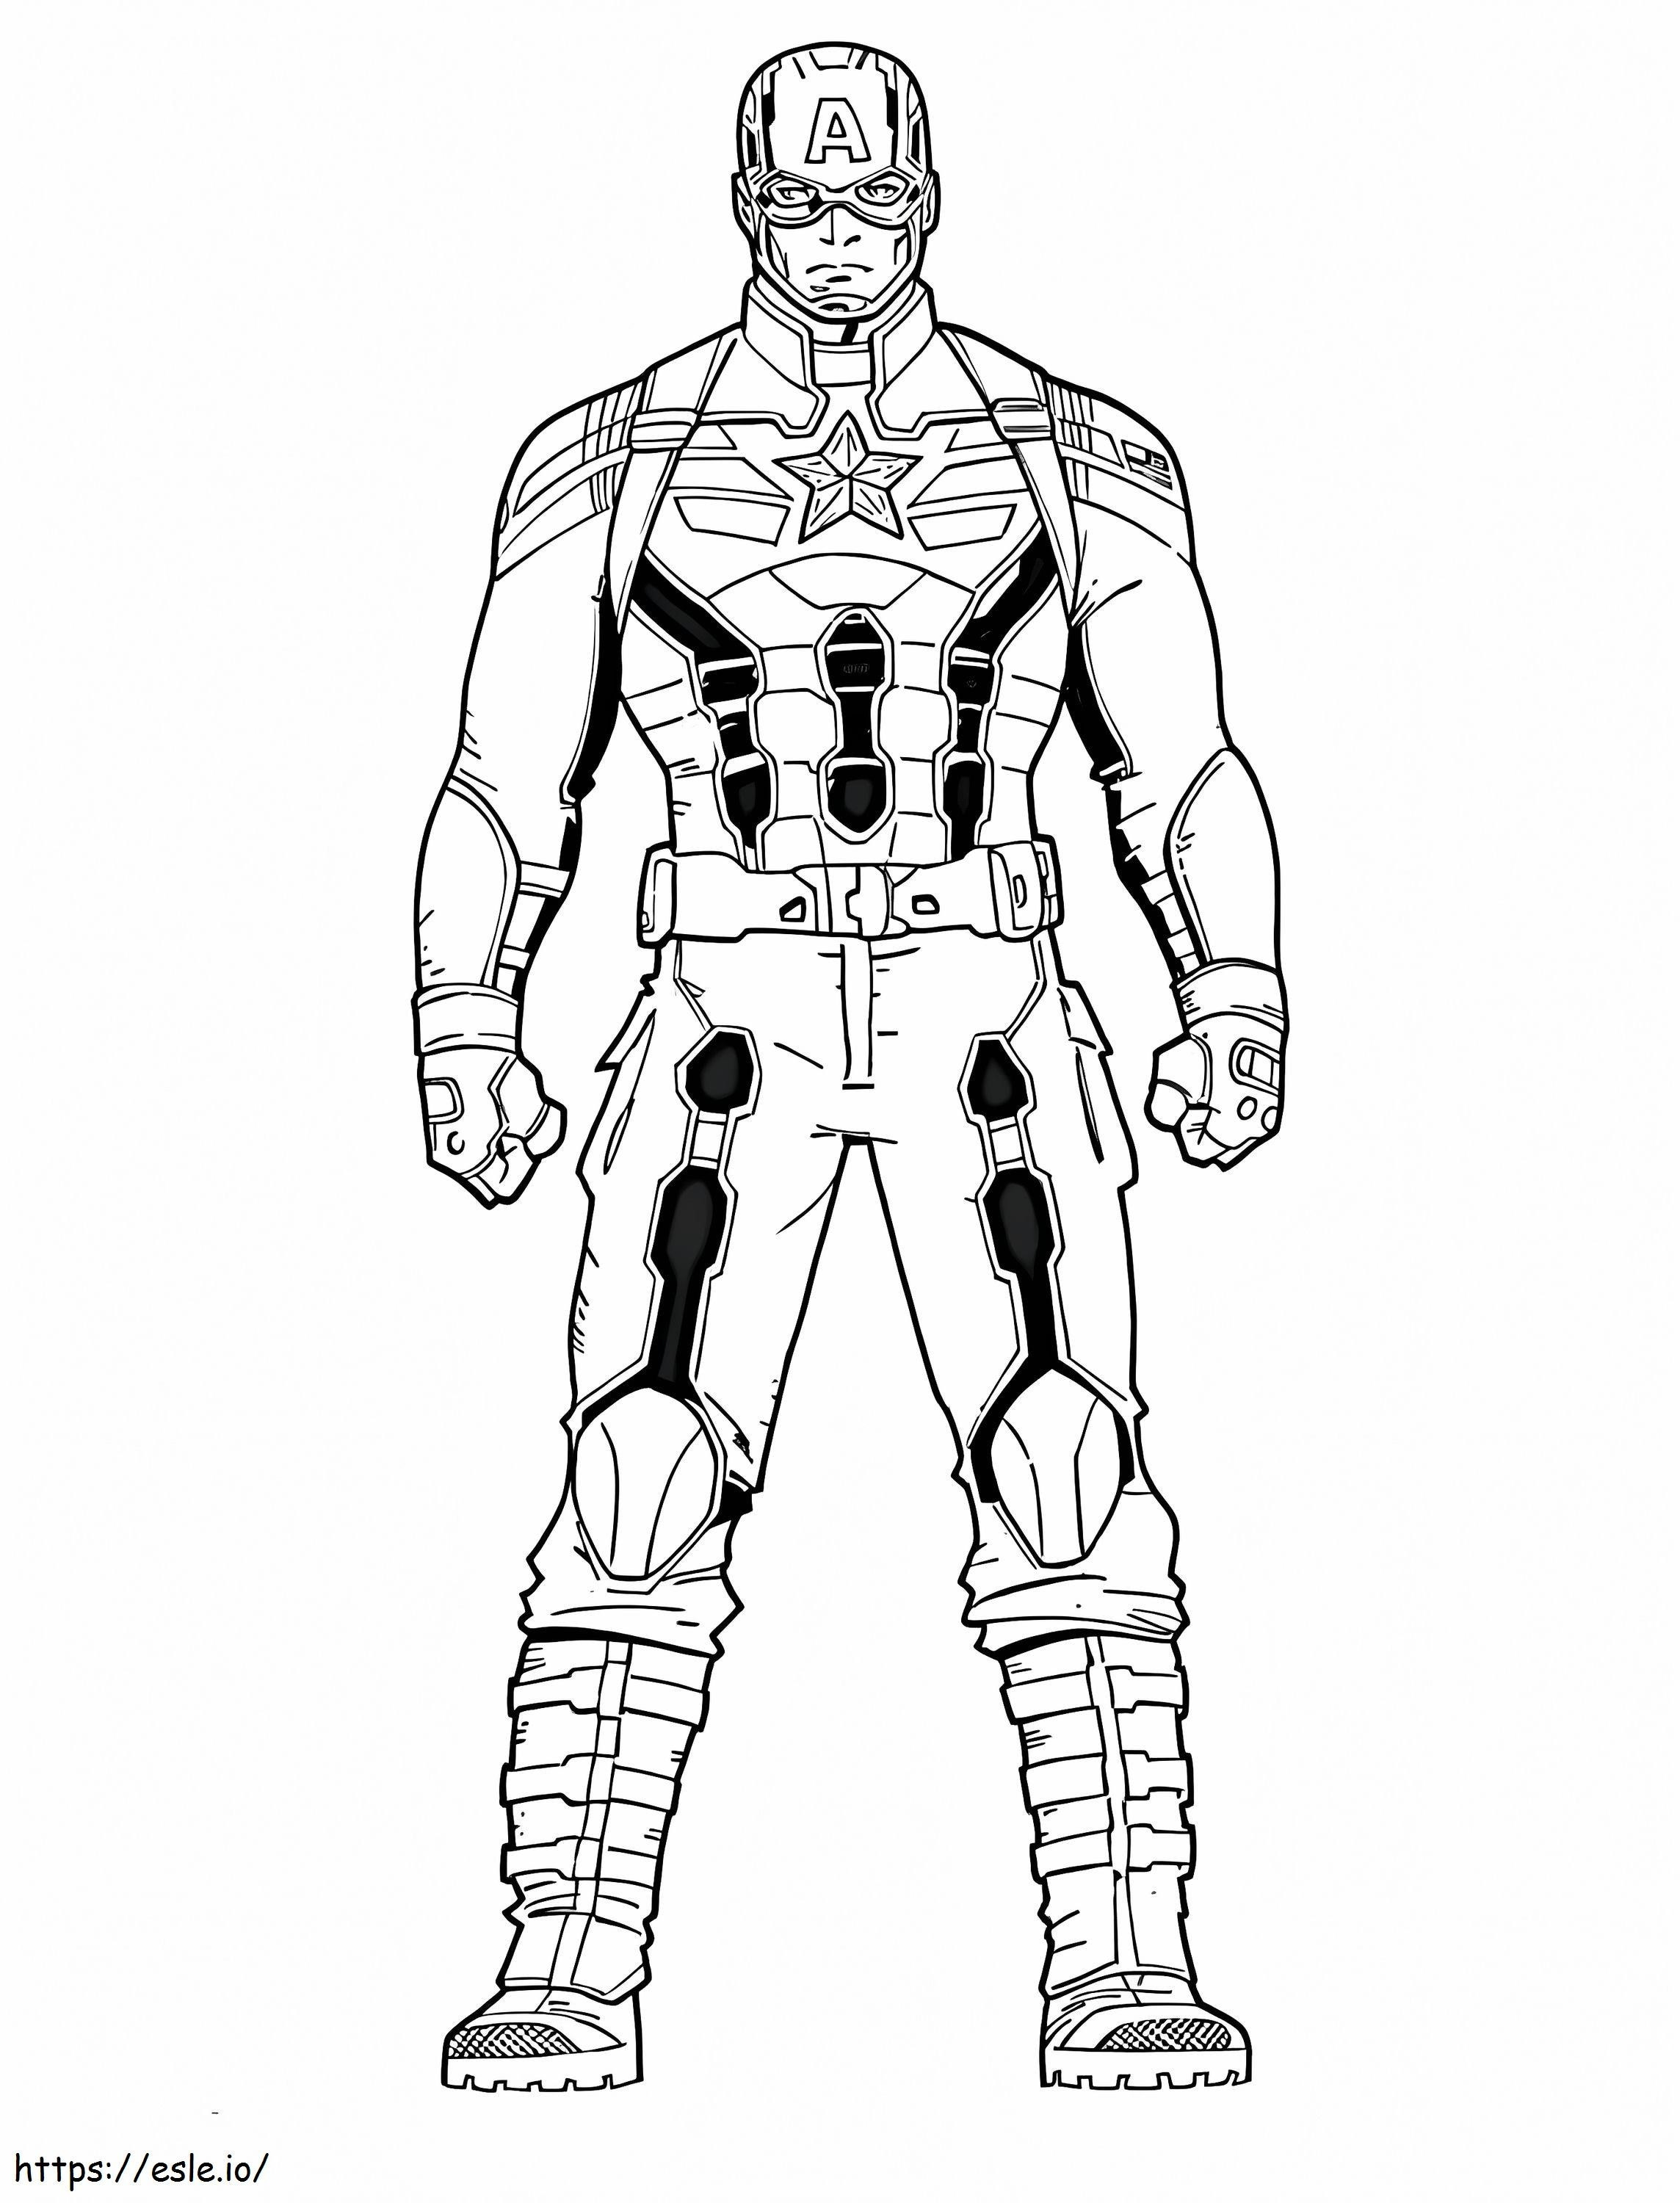 Genial Captain America coloring page